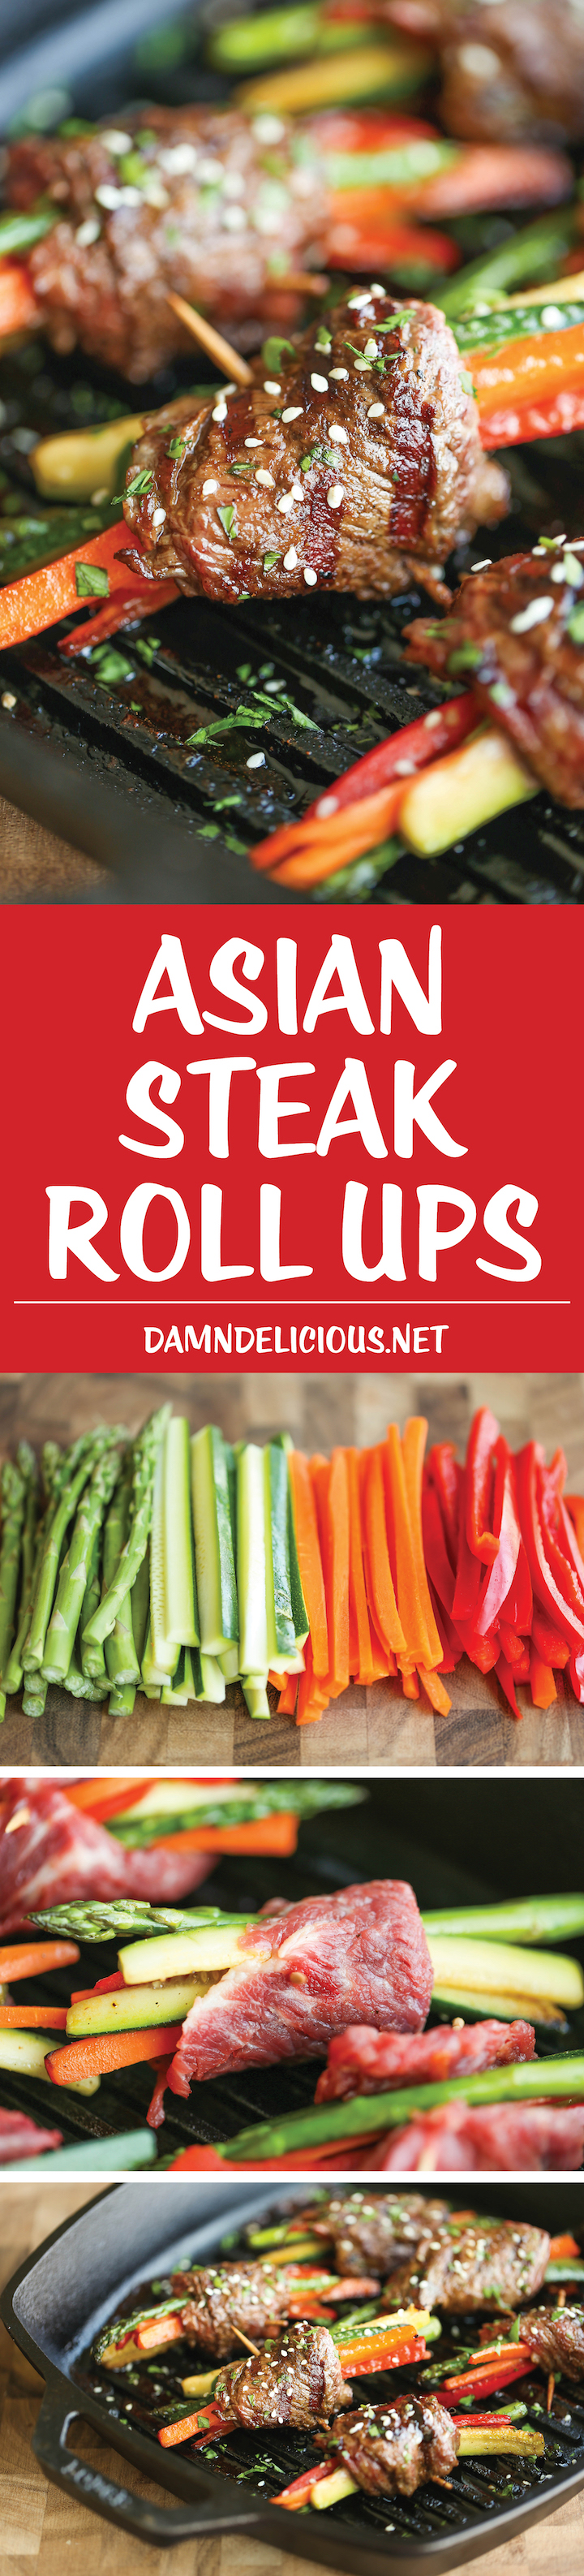 Asian Steak Roll Ups - Easy make-ahead roll ups with tons of veggies and the best Asian marinade loaded with so much flavor. Can be grilled or pan seared!